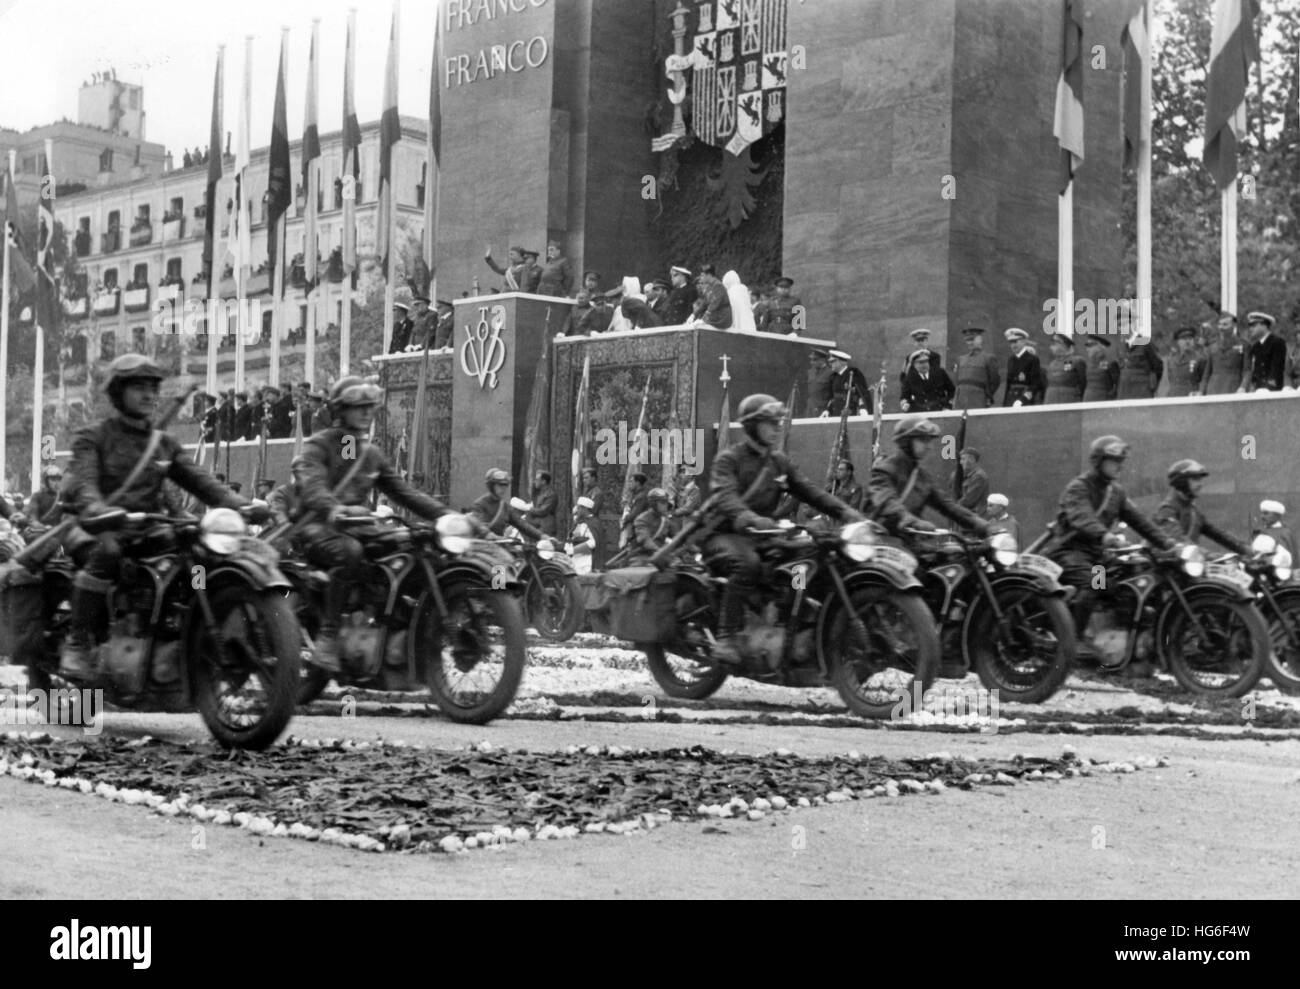 The Nazi propaganda picture shows the marching of voluntary motorists on the occassion of the large victory parade after Franco's takeover in Madrid, Spain, May 1939. Fotoarchiv für Zeitgeschichtee - NO WIRE SERVICE - | usage worldwide Stock Photo